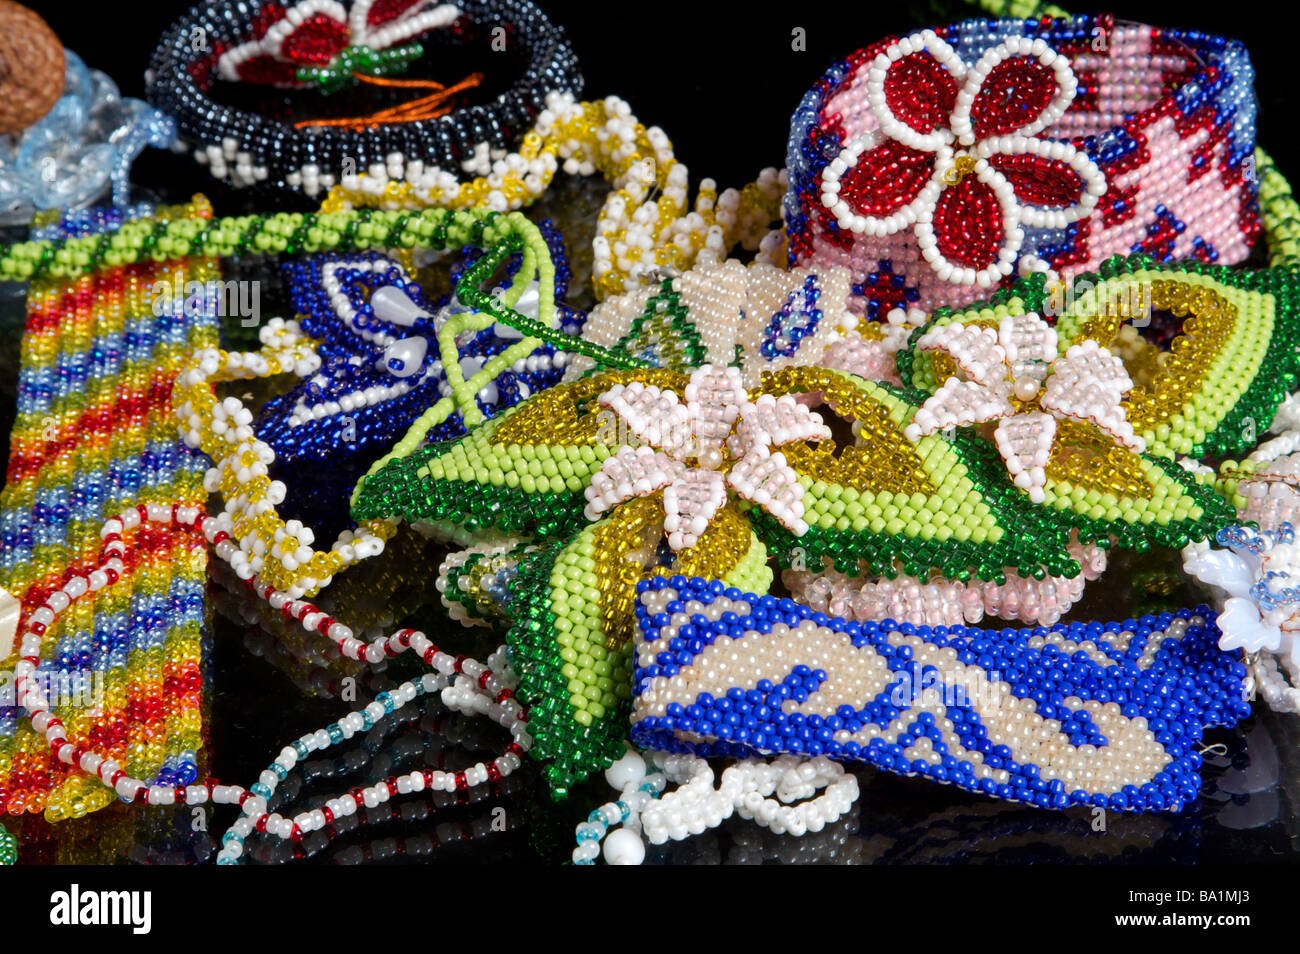 Beading mat with finished designs, needles and colourful beads Stock Photo  - Alamy